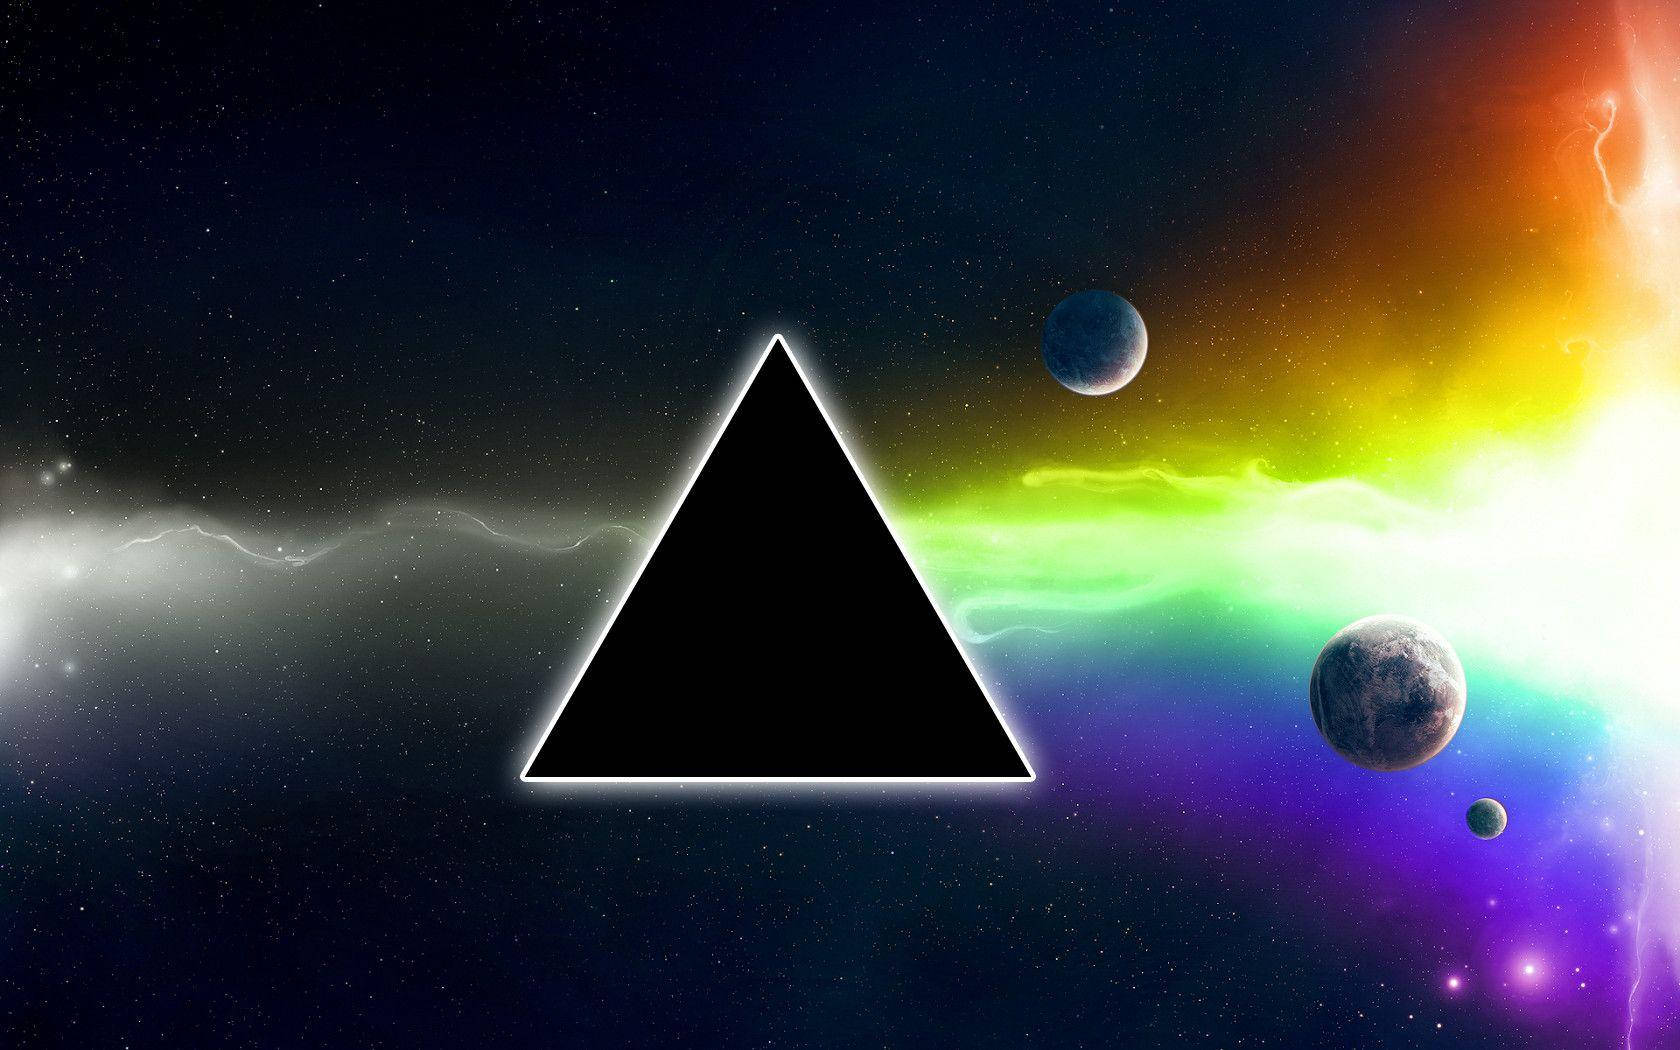 "Pink Floyd's Trippy Triangle in Space" Wallpaper